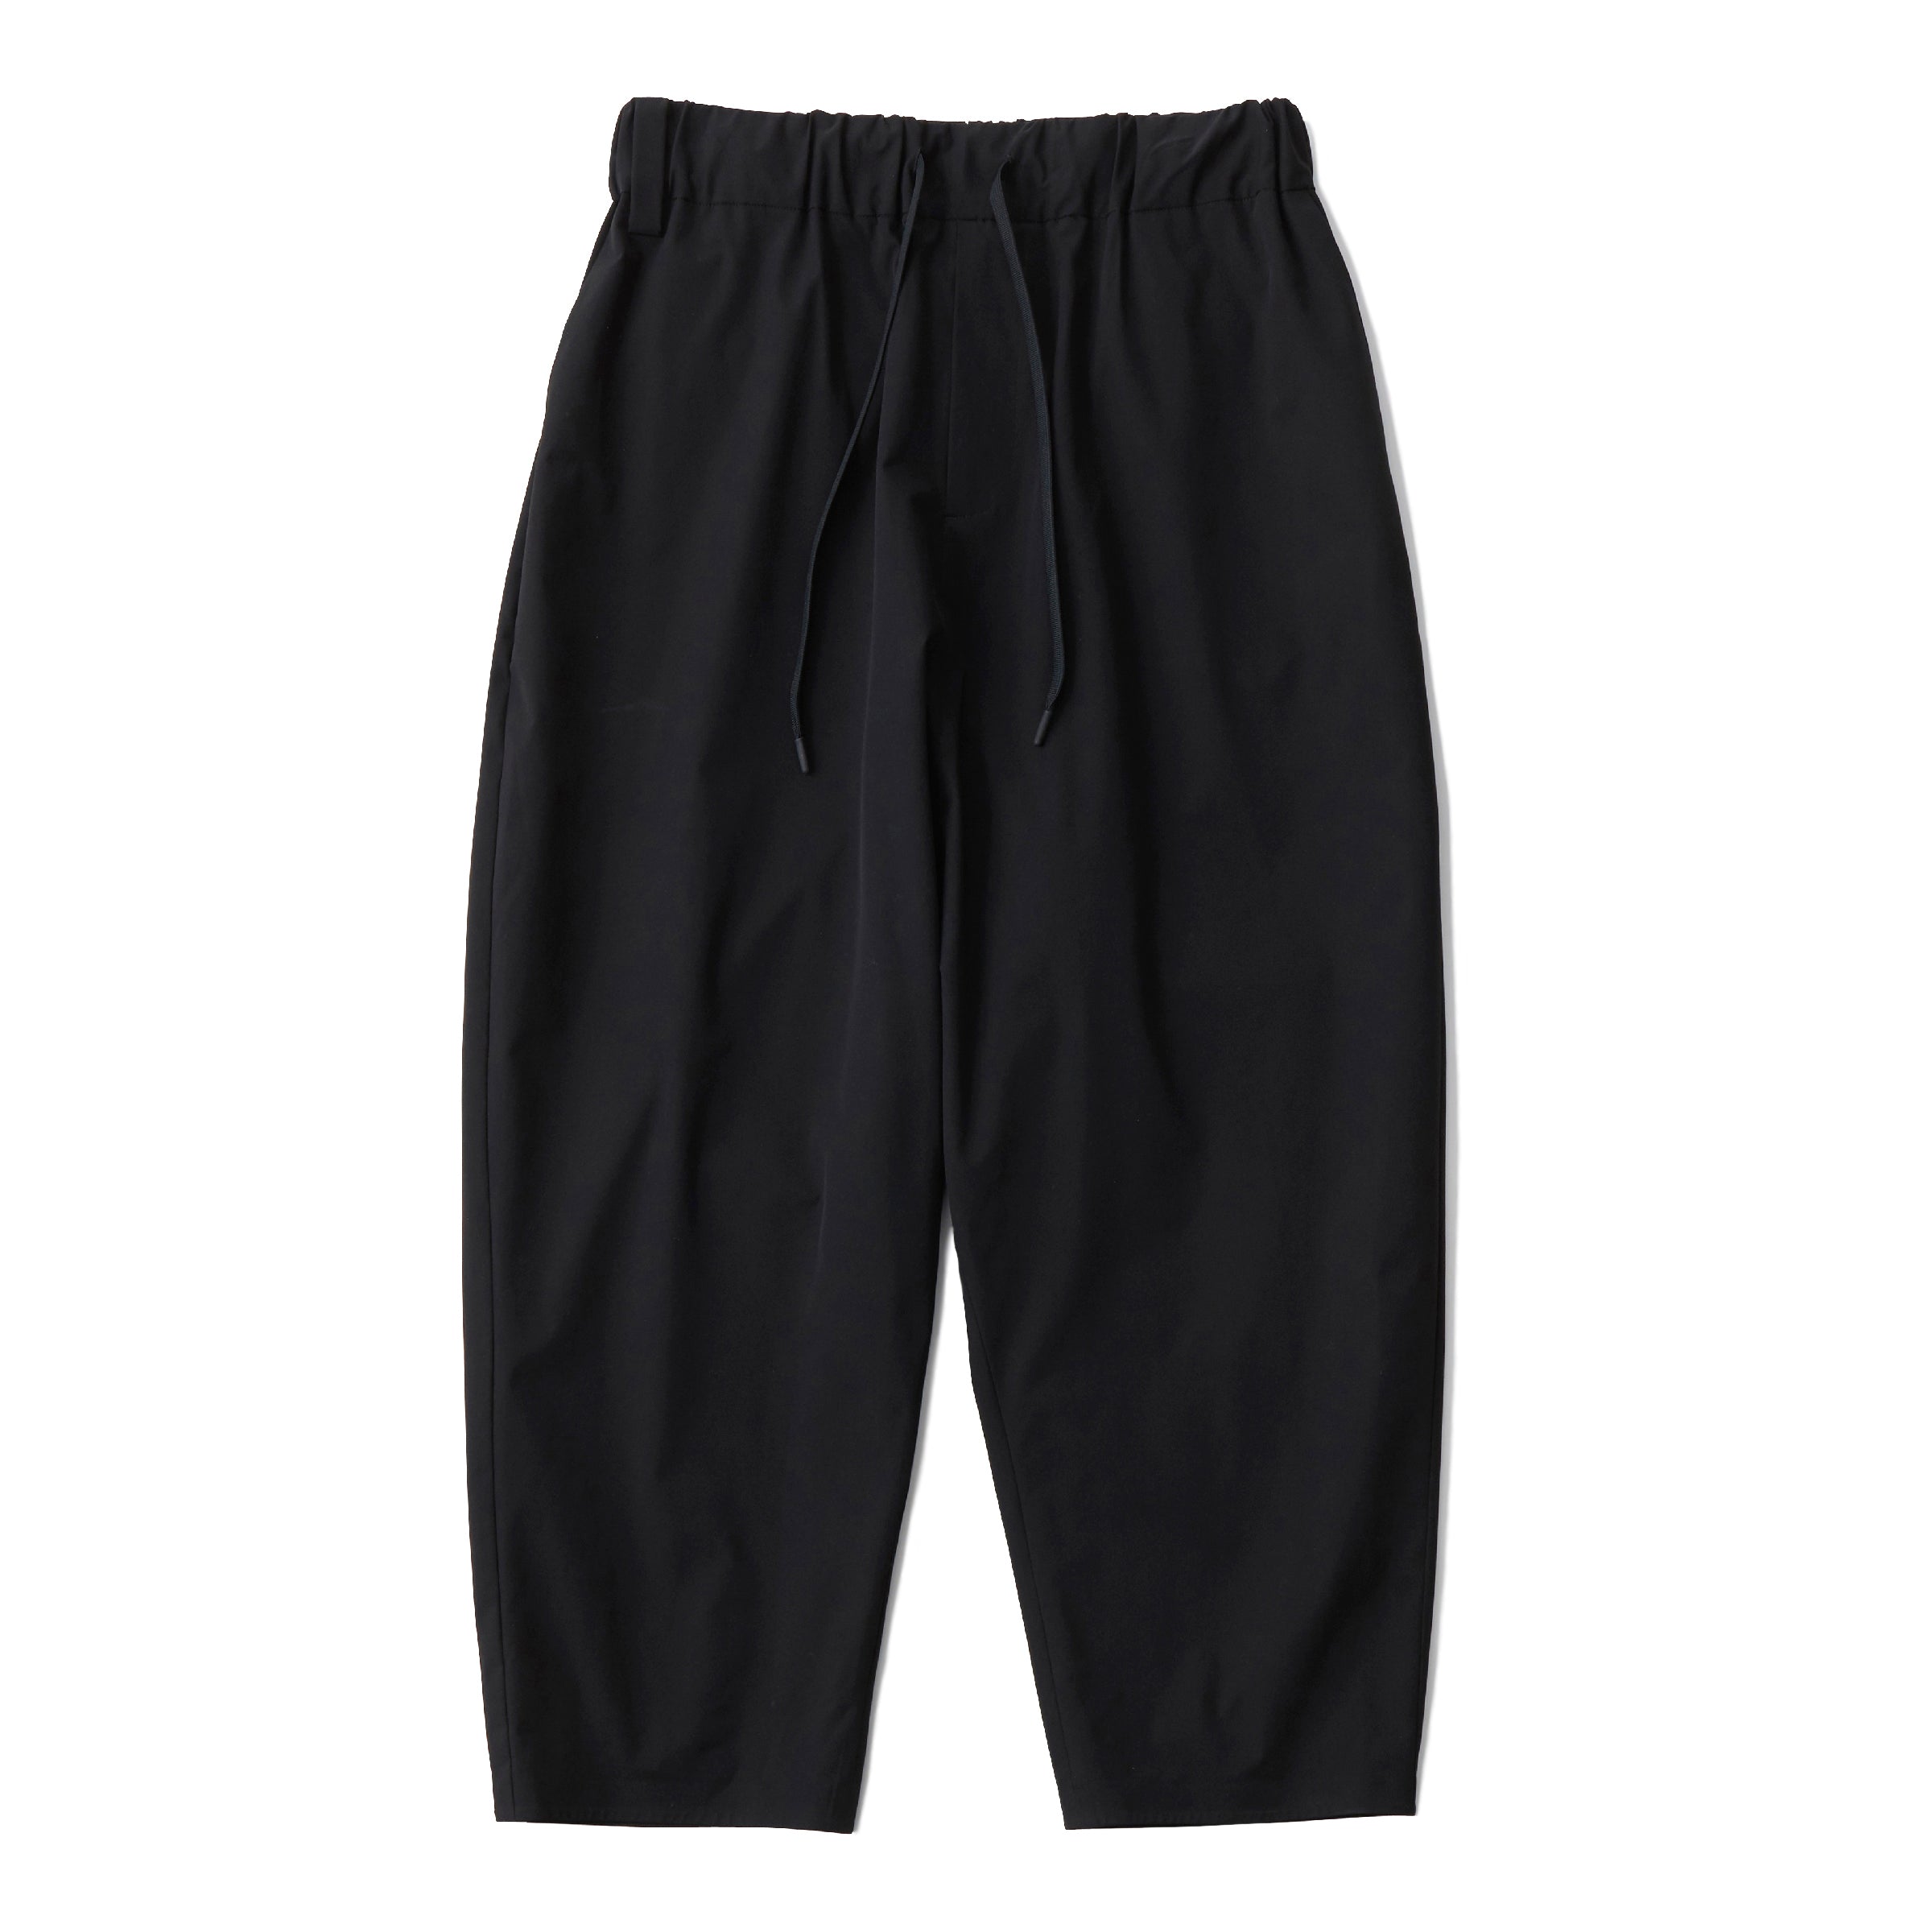 SAROUEL PANTS – White Mountaineering OFFICIAL WEB SITE.